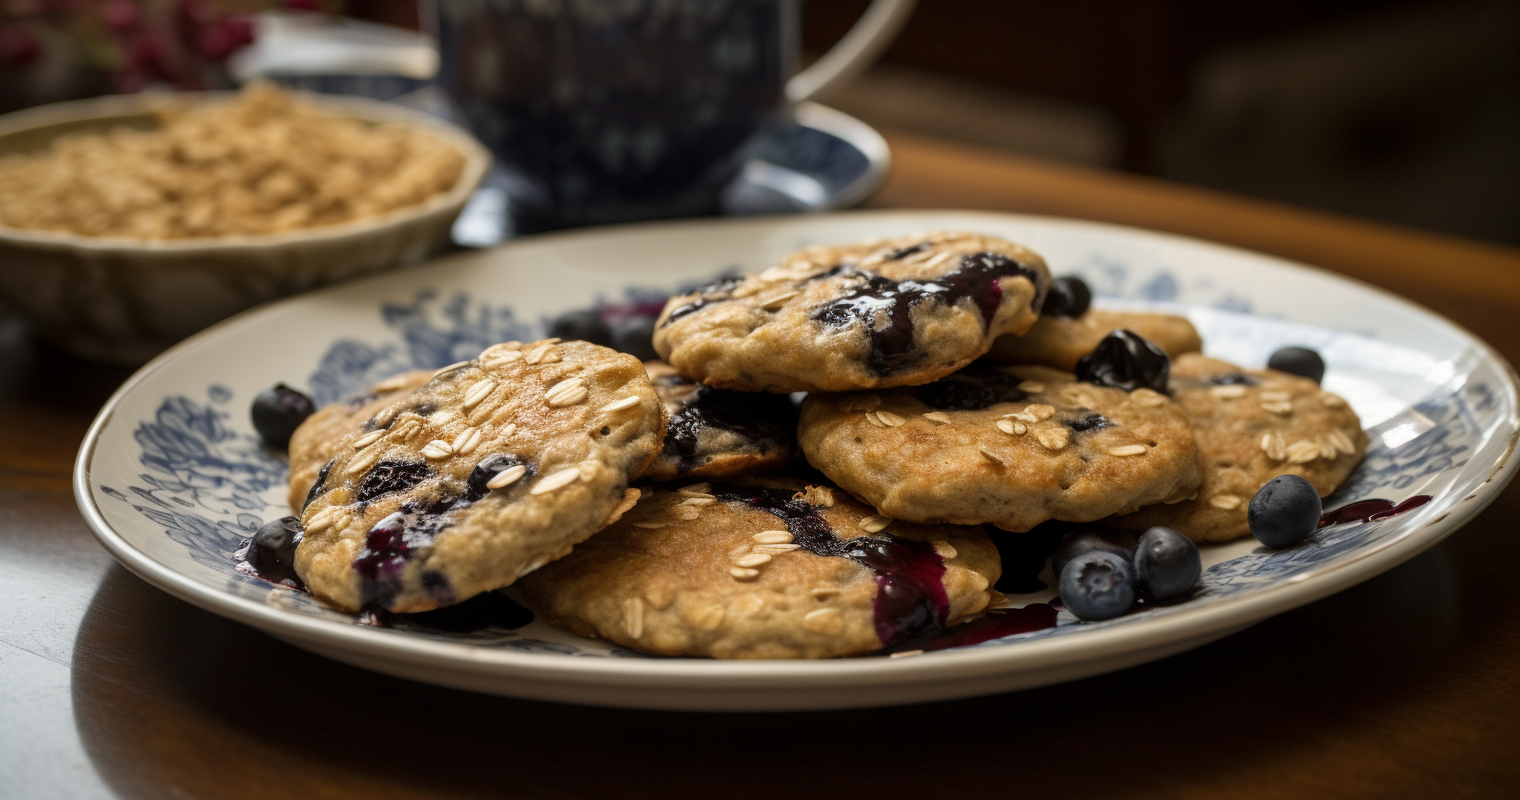 Blueberry-Maple Jam-Filled Oatmeal Cookies